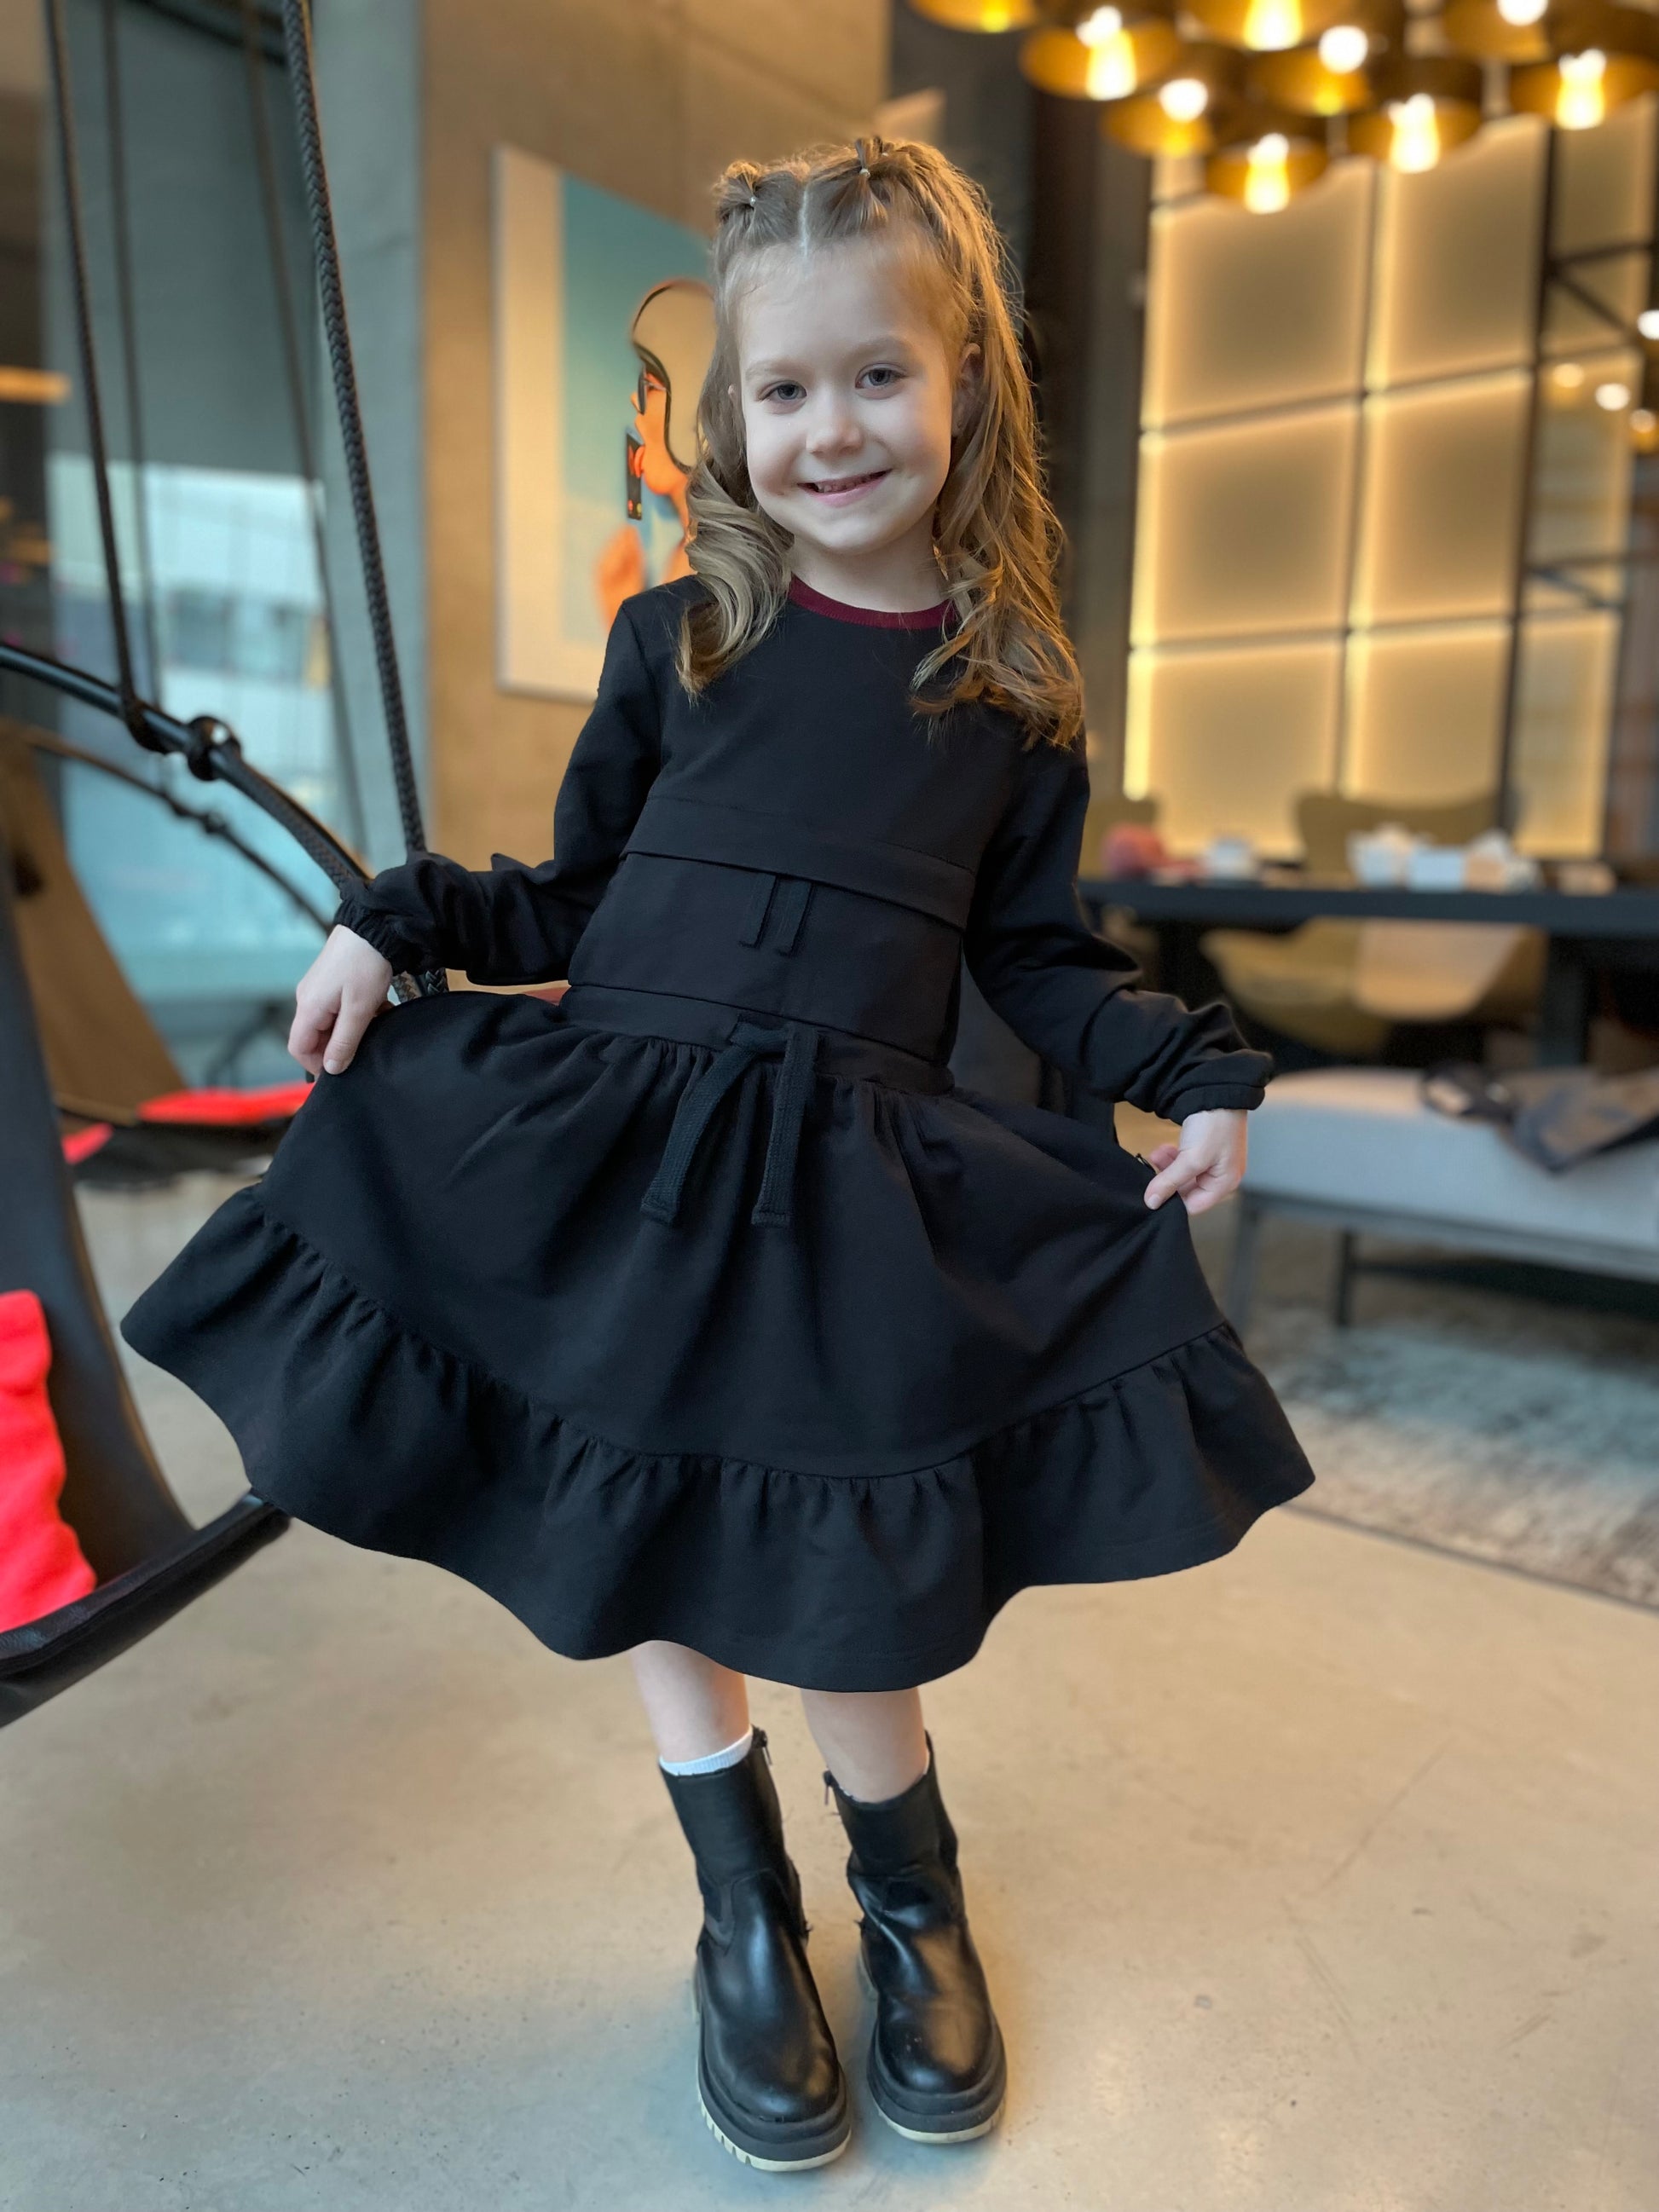 Type 1 Diabetes Clothing - Cotton dress with pockets Black | Our Pocket Hero